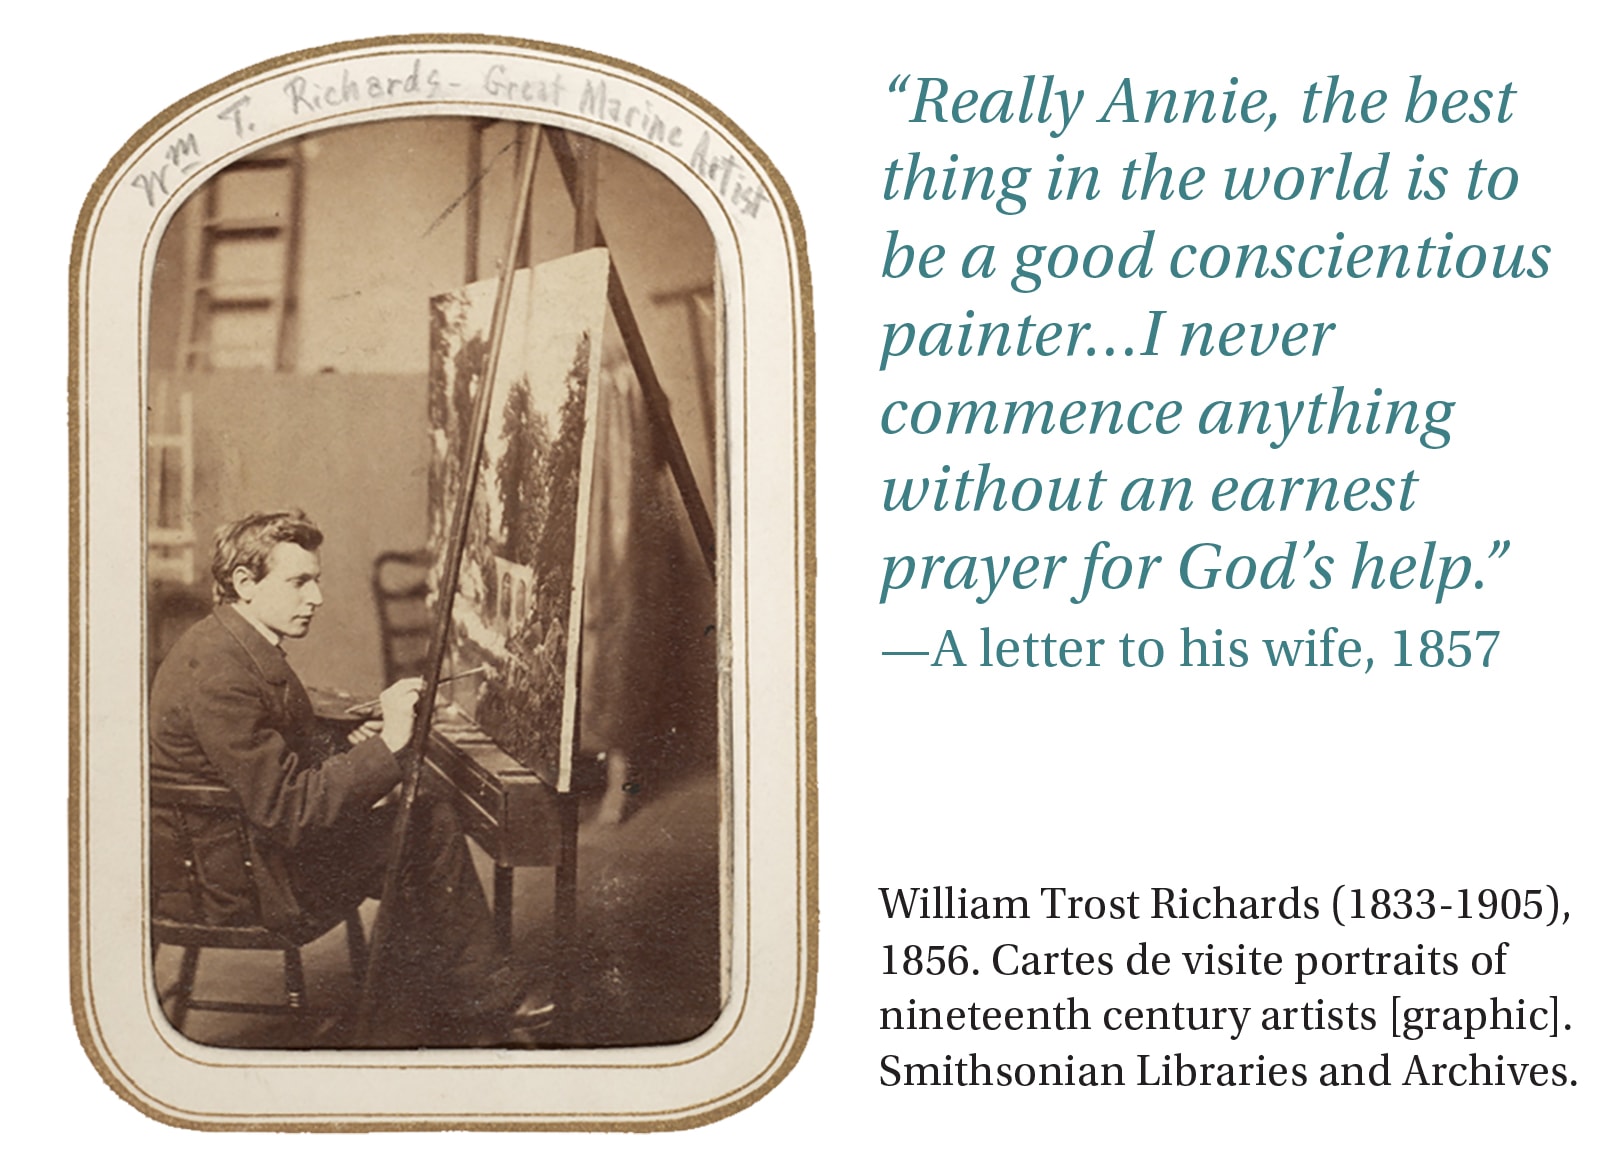 “Really Annie, the best thing in the world is to be a good conscientious painter…I never commence anything without an earnest prayer for God’s help.” -A letter to his wife, 1857. William Trost Richards (1833-1905), 1856. Cartes de visite portraits of nineteenth century artists [graphic]. Smithsonian Libraries and Archives.